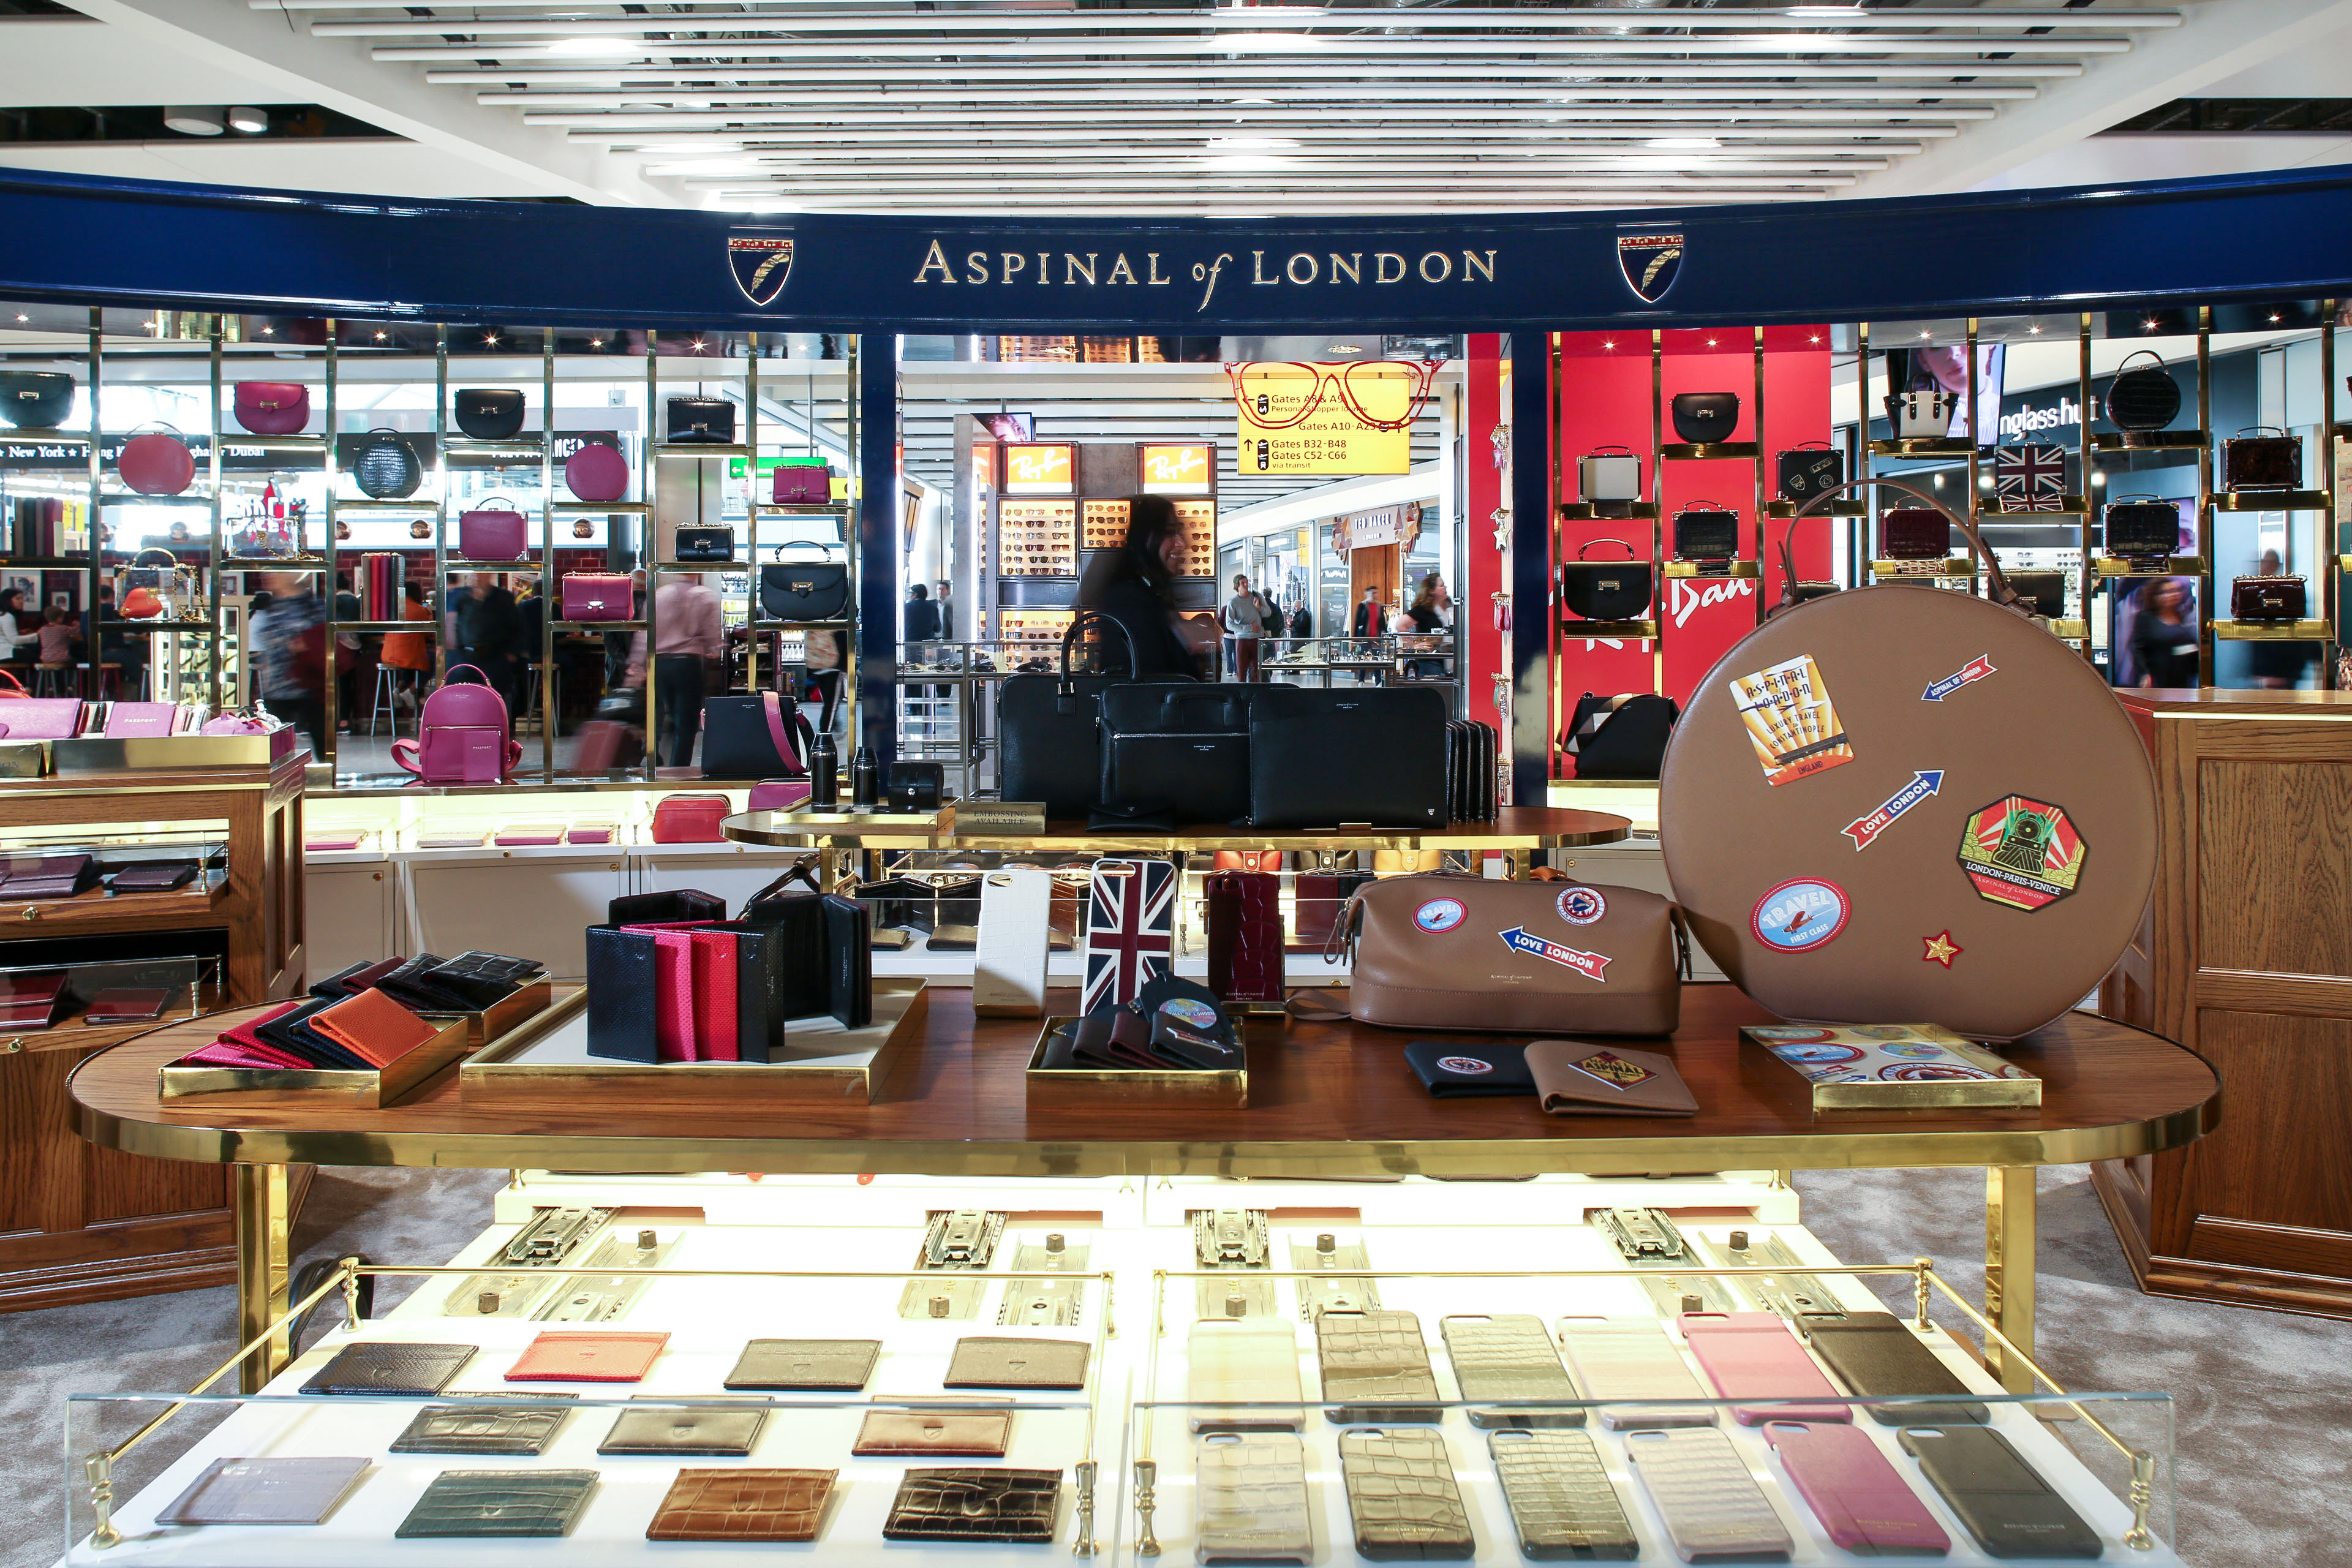 Louis Vuitton pop-up returns to Heathrow ahead of permanent store launch